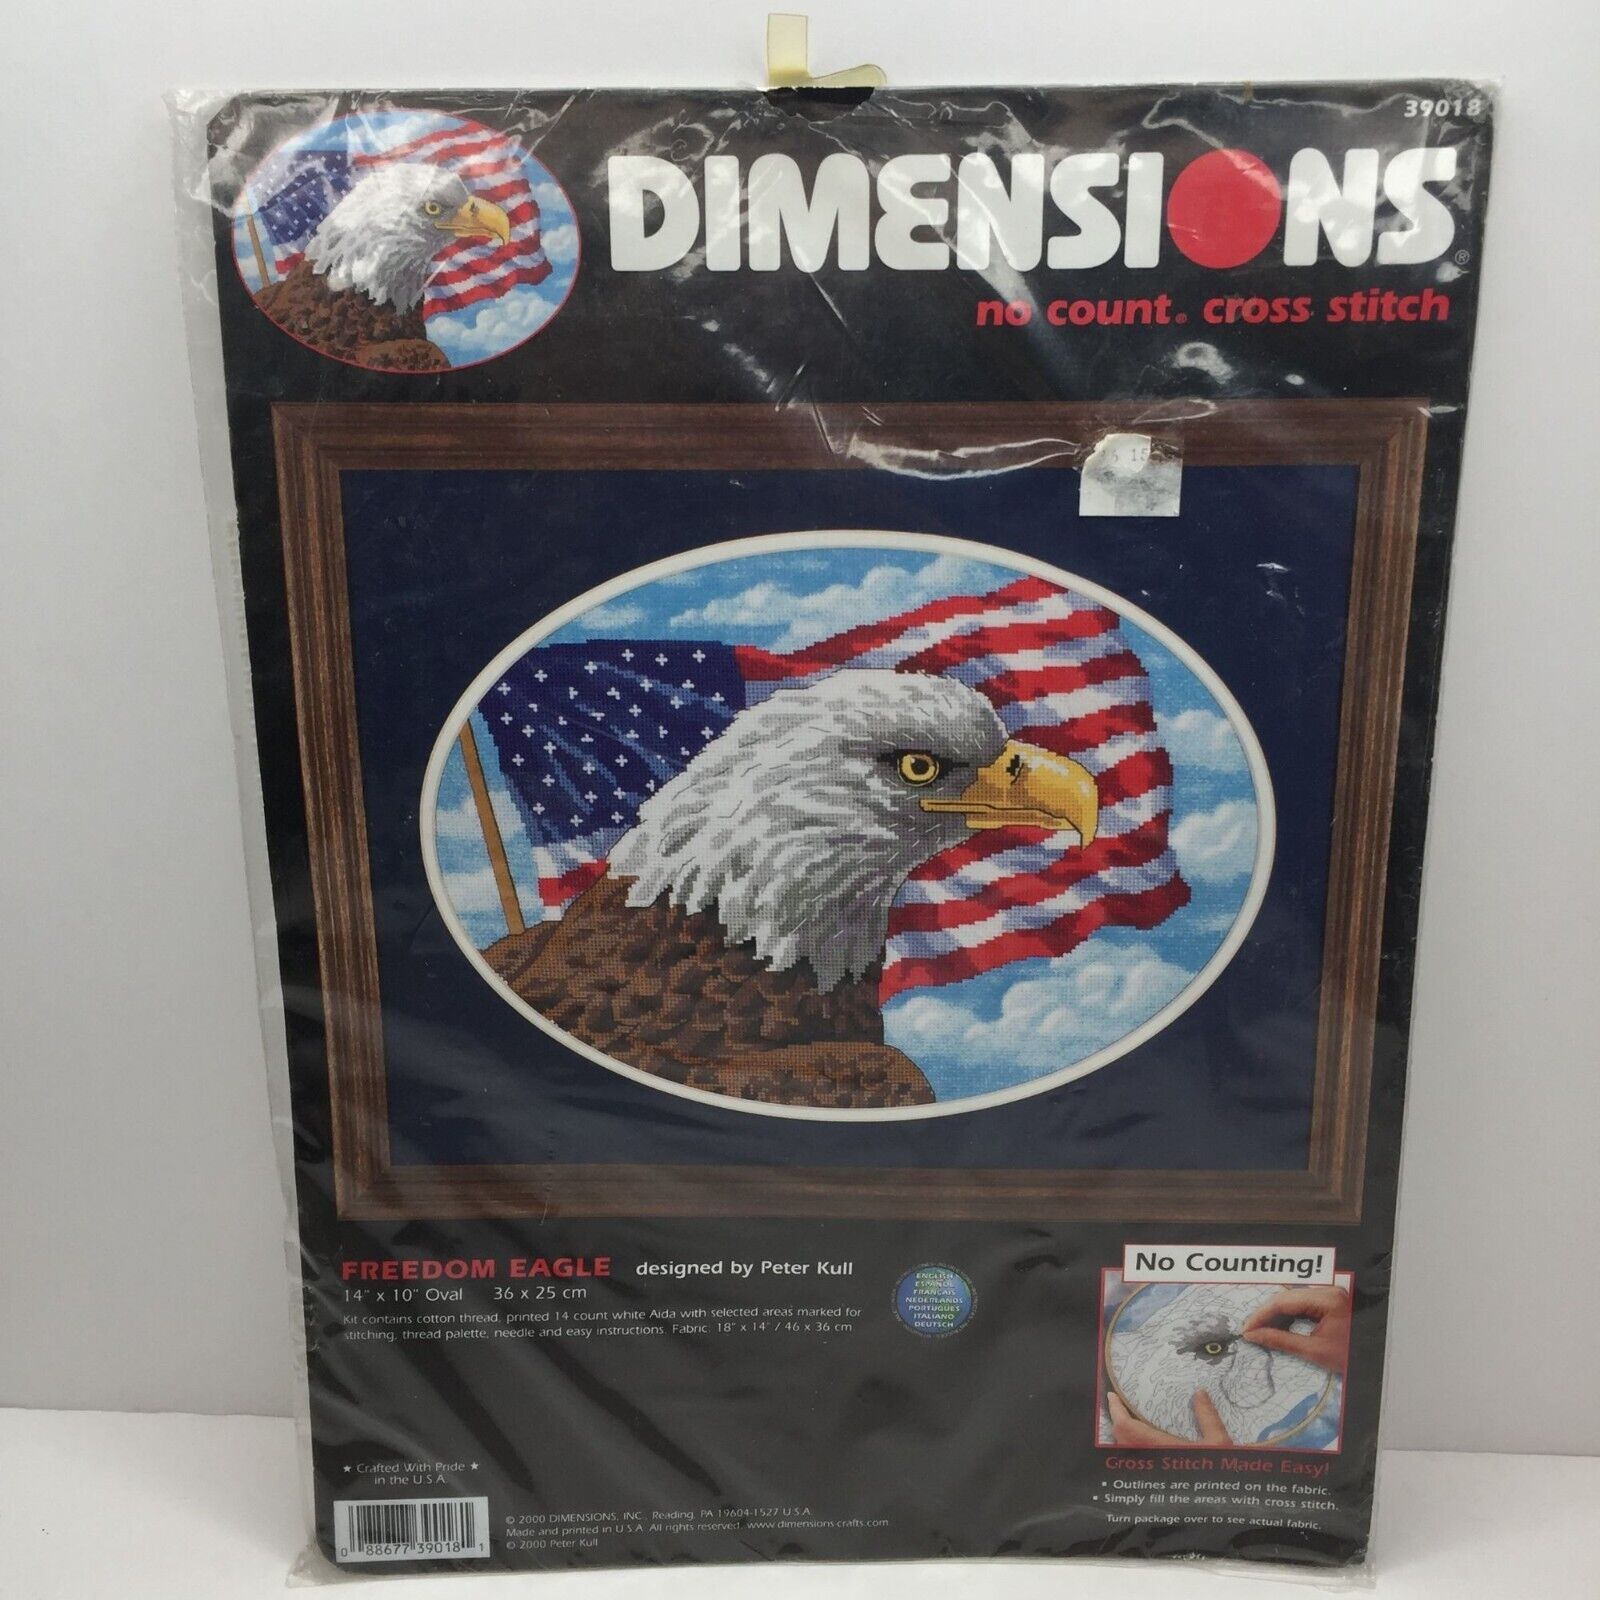 Vintage Dimensions No Count Cross Stitch Freedom Eagle USA Patriotic 14x10" Oval - $19.99